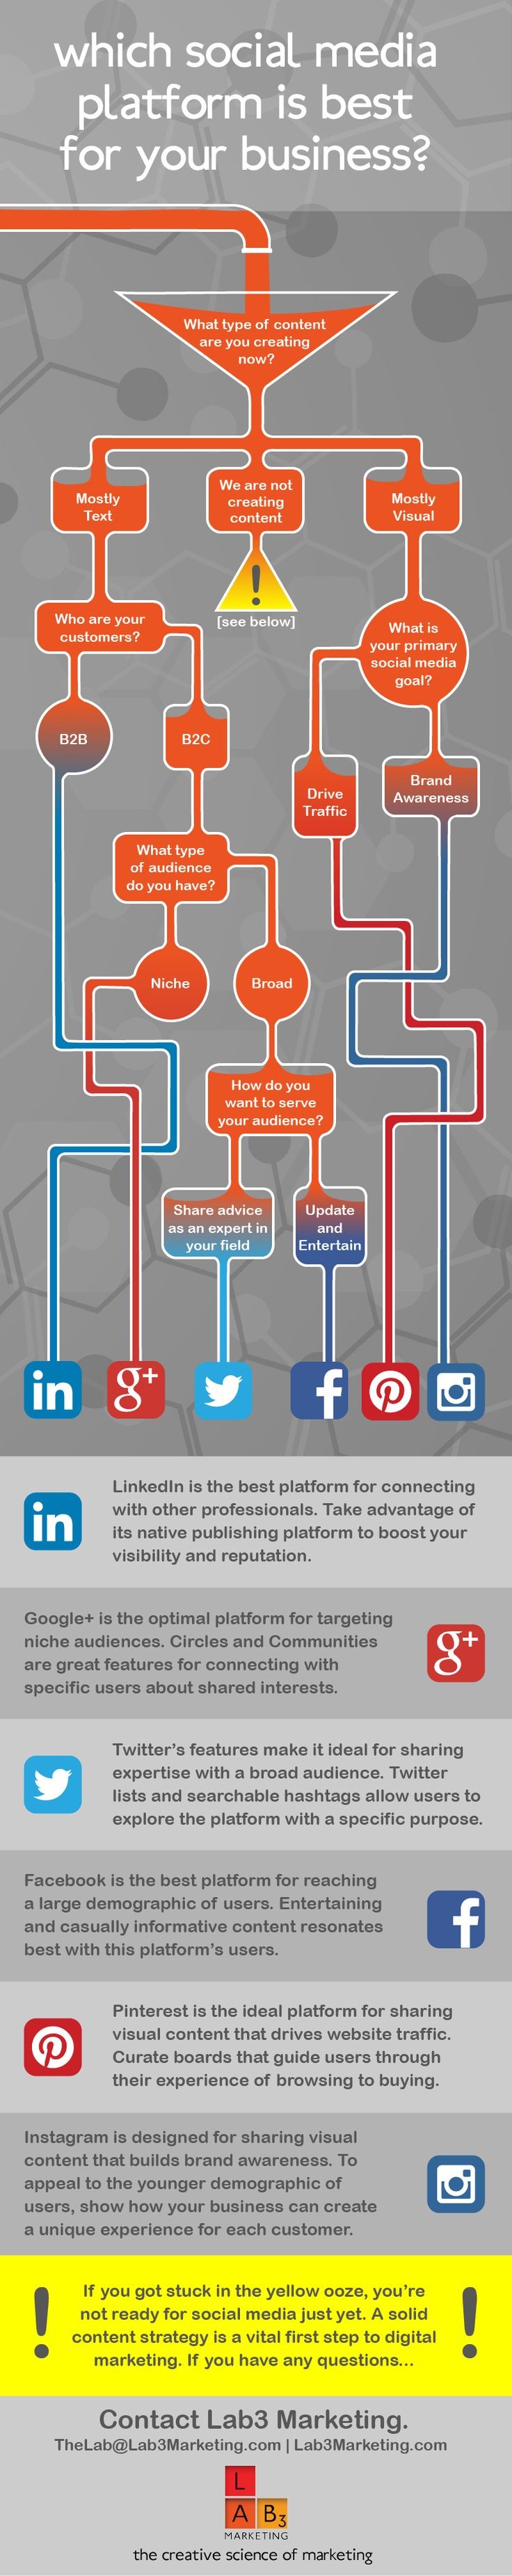 Follow the inflowgraphic to determine which social...